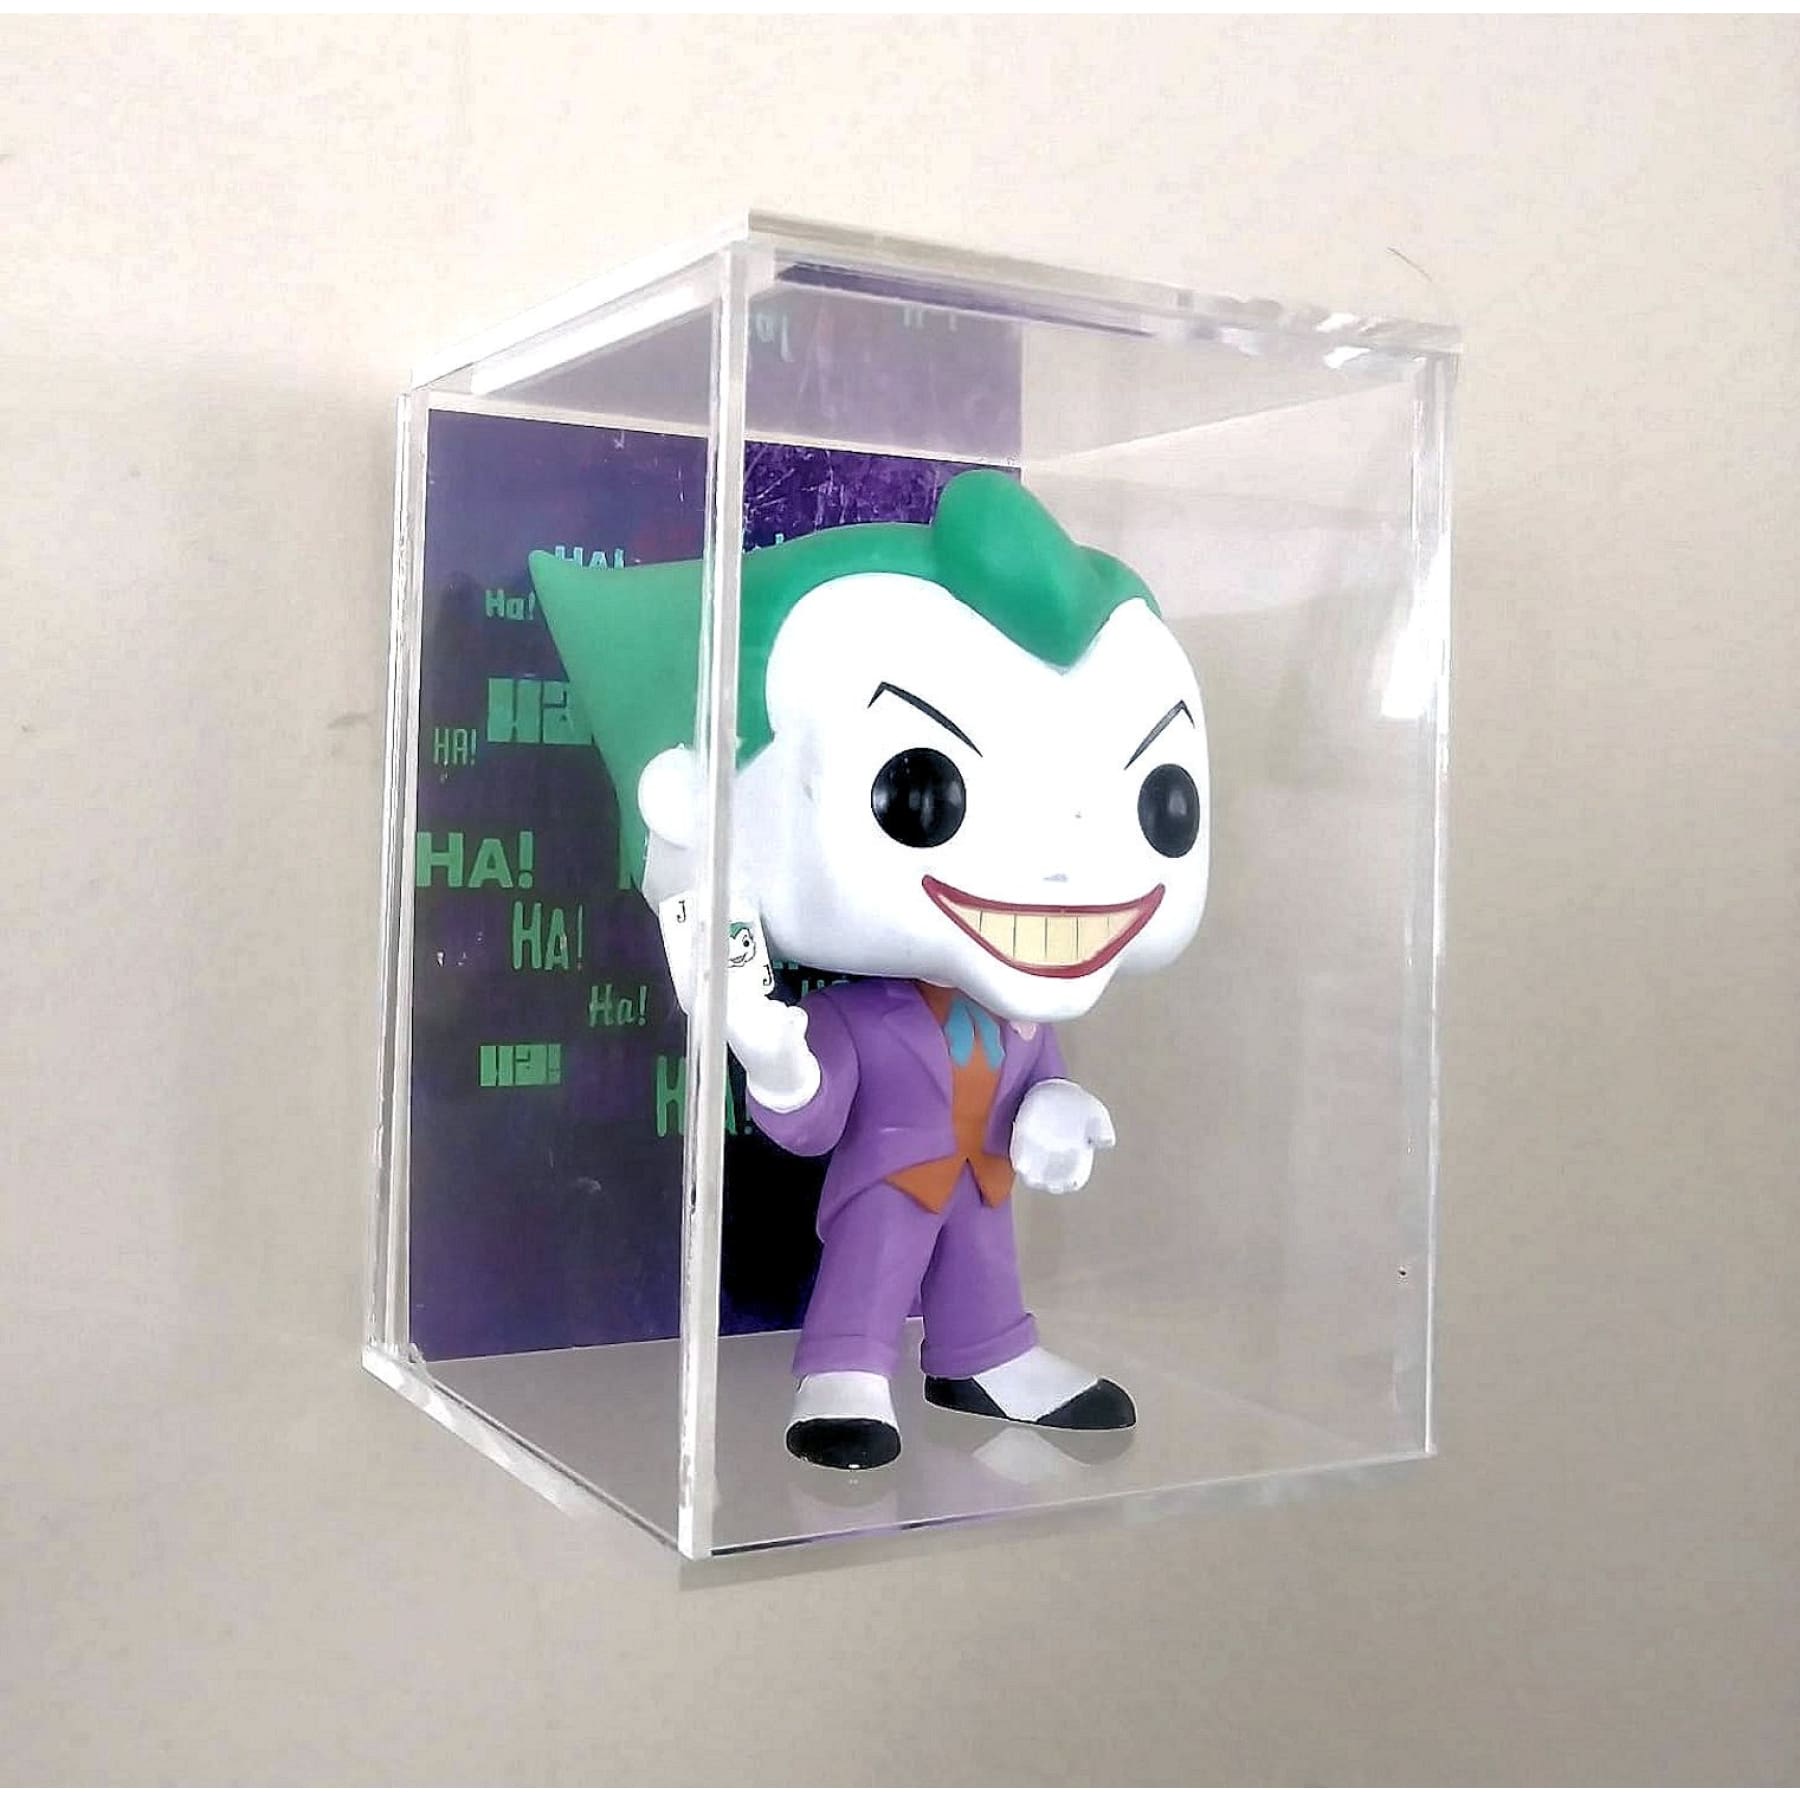 For Funko Pop: Wall Single Case with theme background, acrylic Box